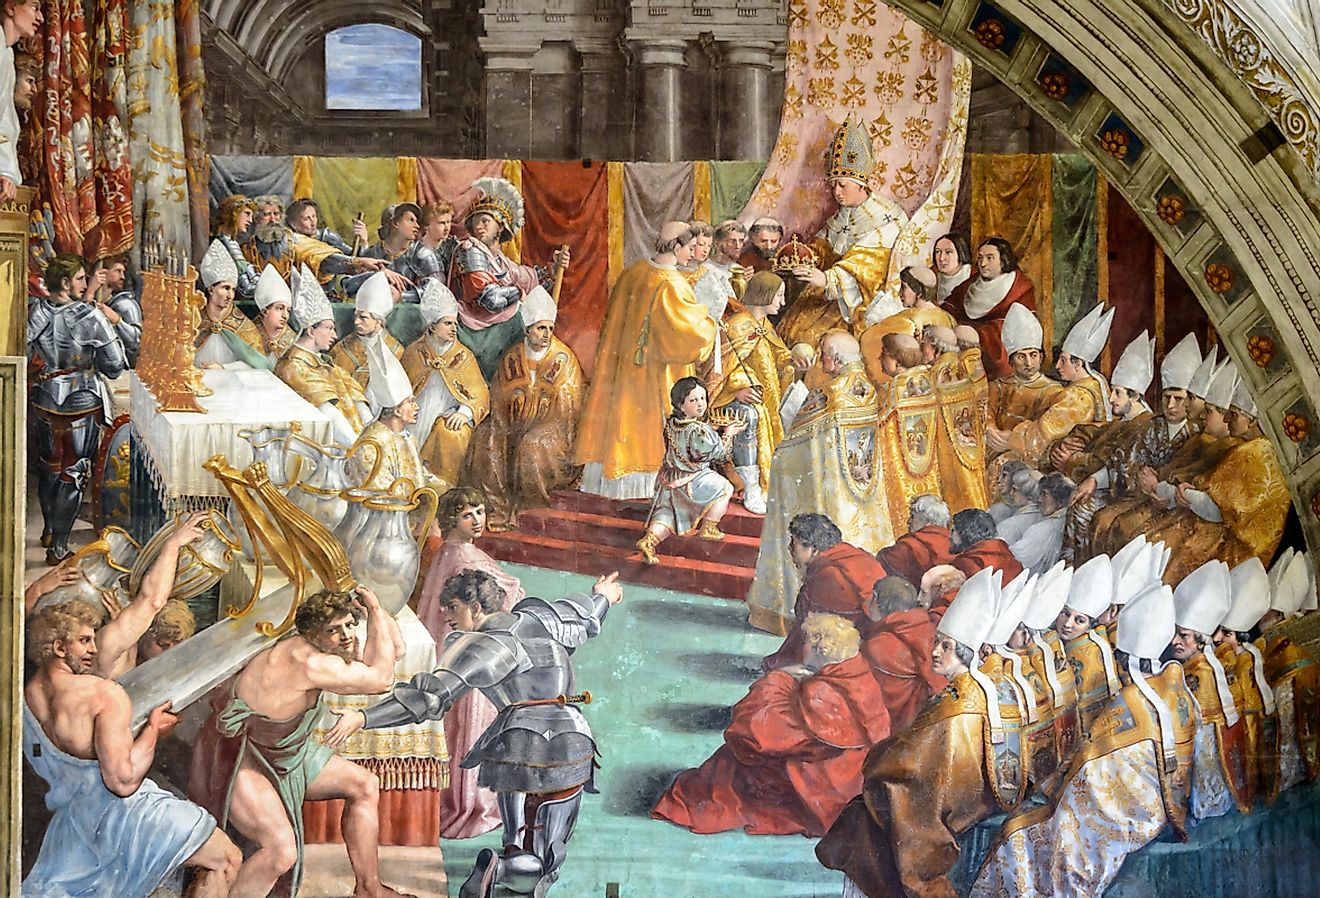 A painting depicting the crowning of Charlemagne as the Holy Roman Emperor in 800 CE. Image credit Viacheslav Lopatin via Shutterstock